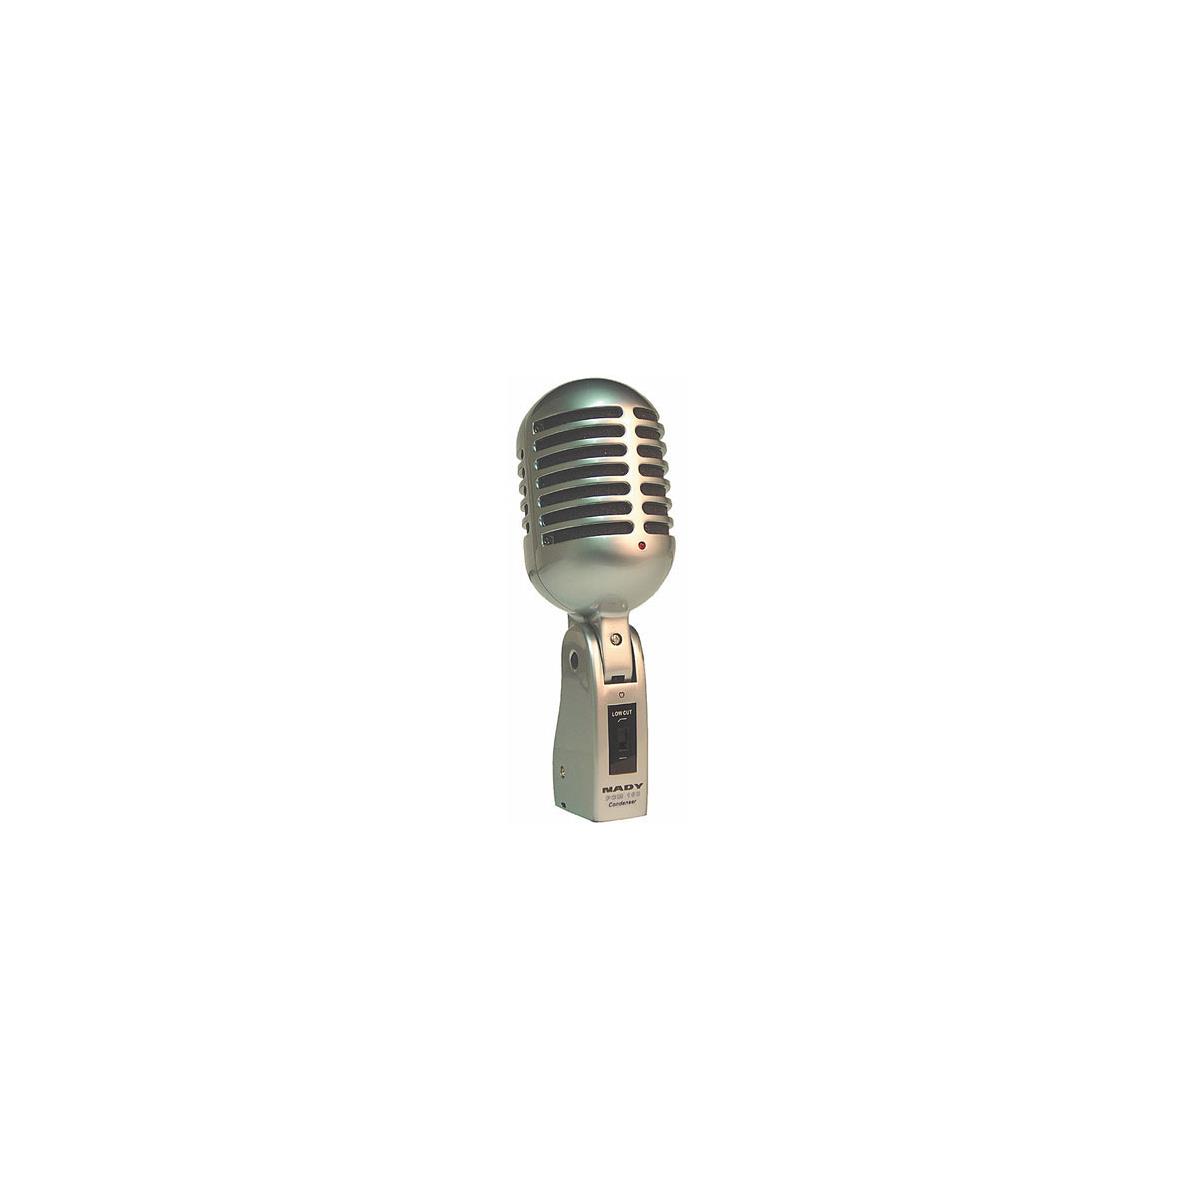 Image of Nady PCM-100 Classic Condenser Microphone with Vintage Retro-look Styling